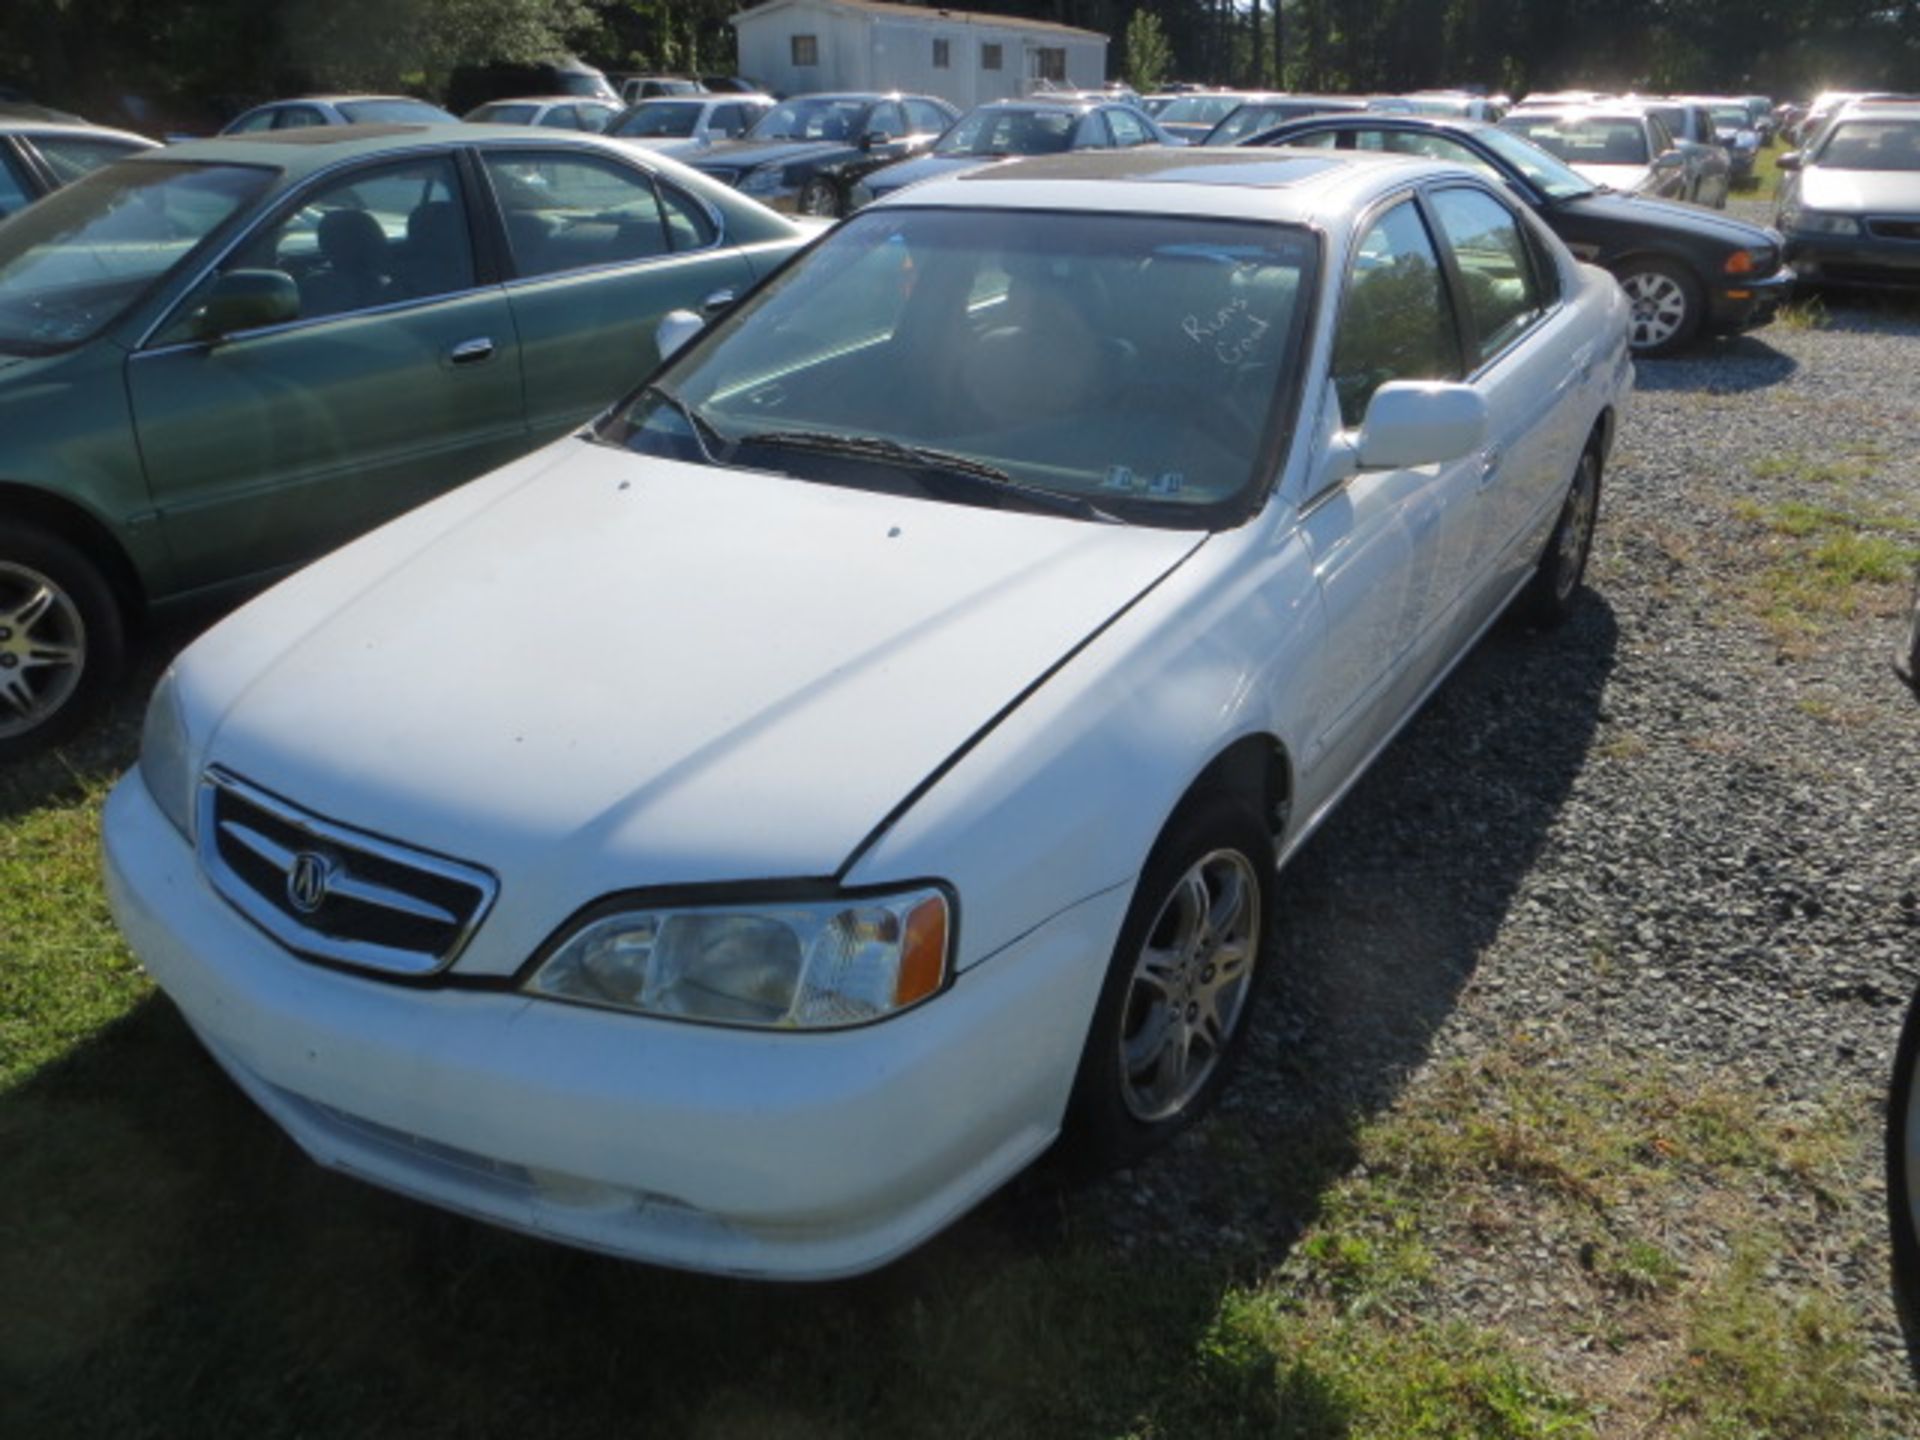 1999 Acura TL- 194000 MILES,VIN 19UUA5640XA010961, VEHICLE BEING SOLD WITH SALVAGE TITLE AND - Image 2 of 3